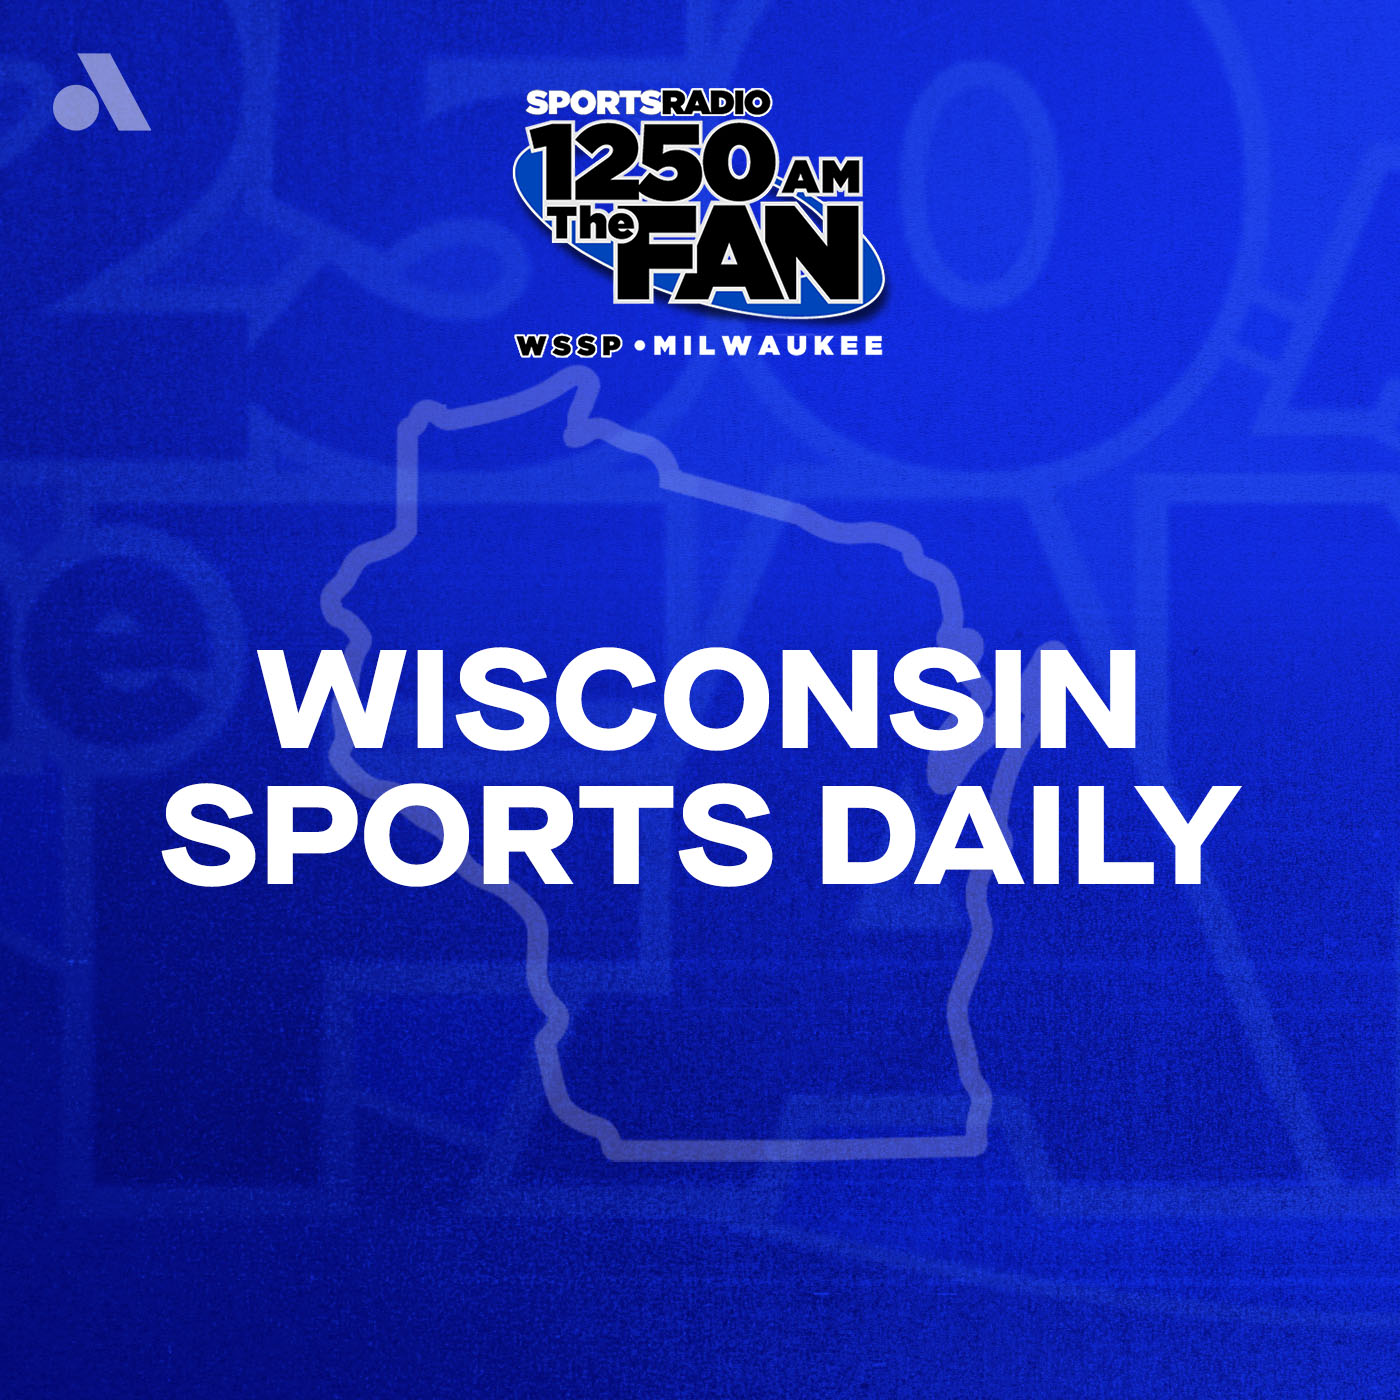 Thursday, April 25th: "The Gravedigger" Gilbert Brown Joins Wisconsin Sports Daily!